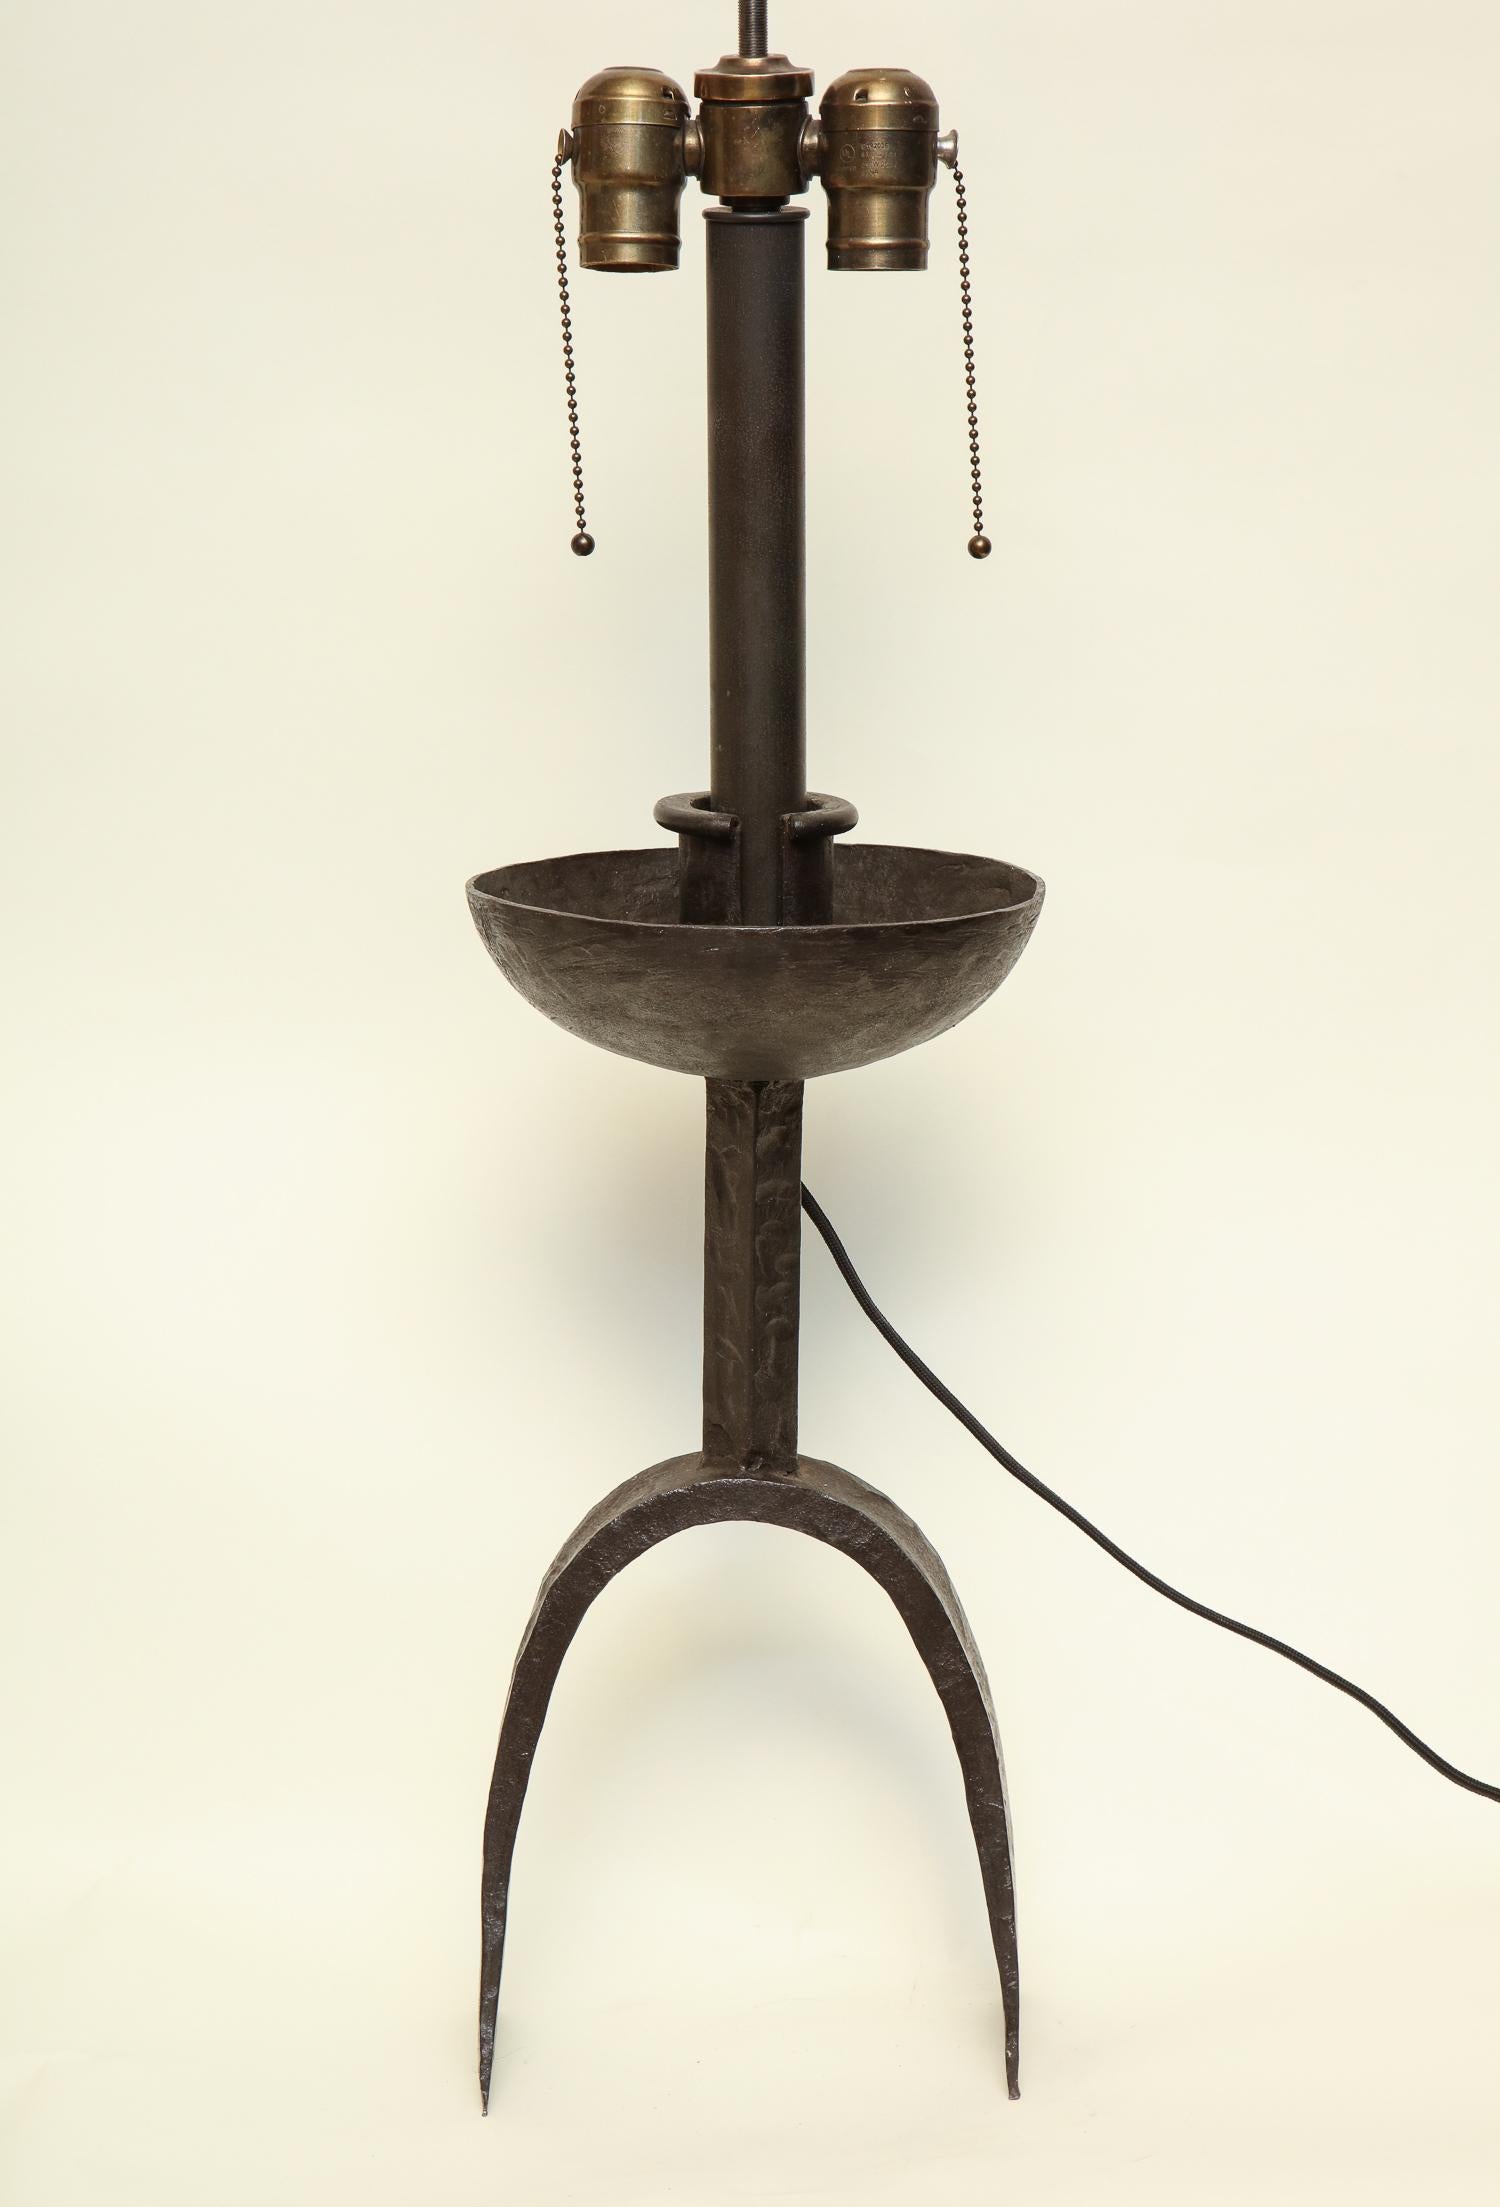 A brutalist table lamp handcrafted wrought iron Mid-Century Modern, Italy, 1960s.
New sockets and rewired shade not included.
  